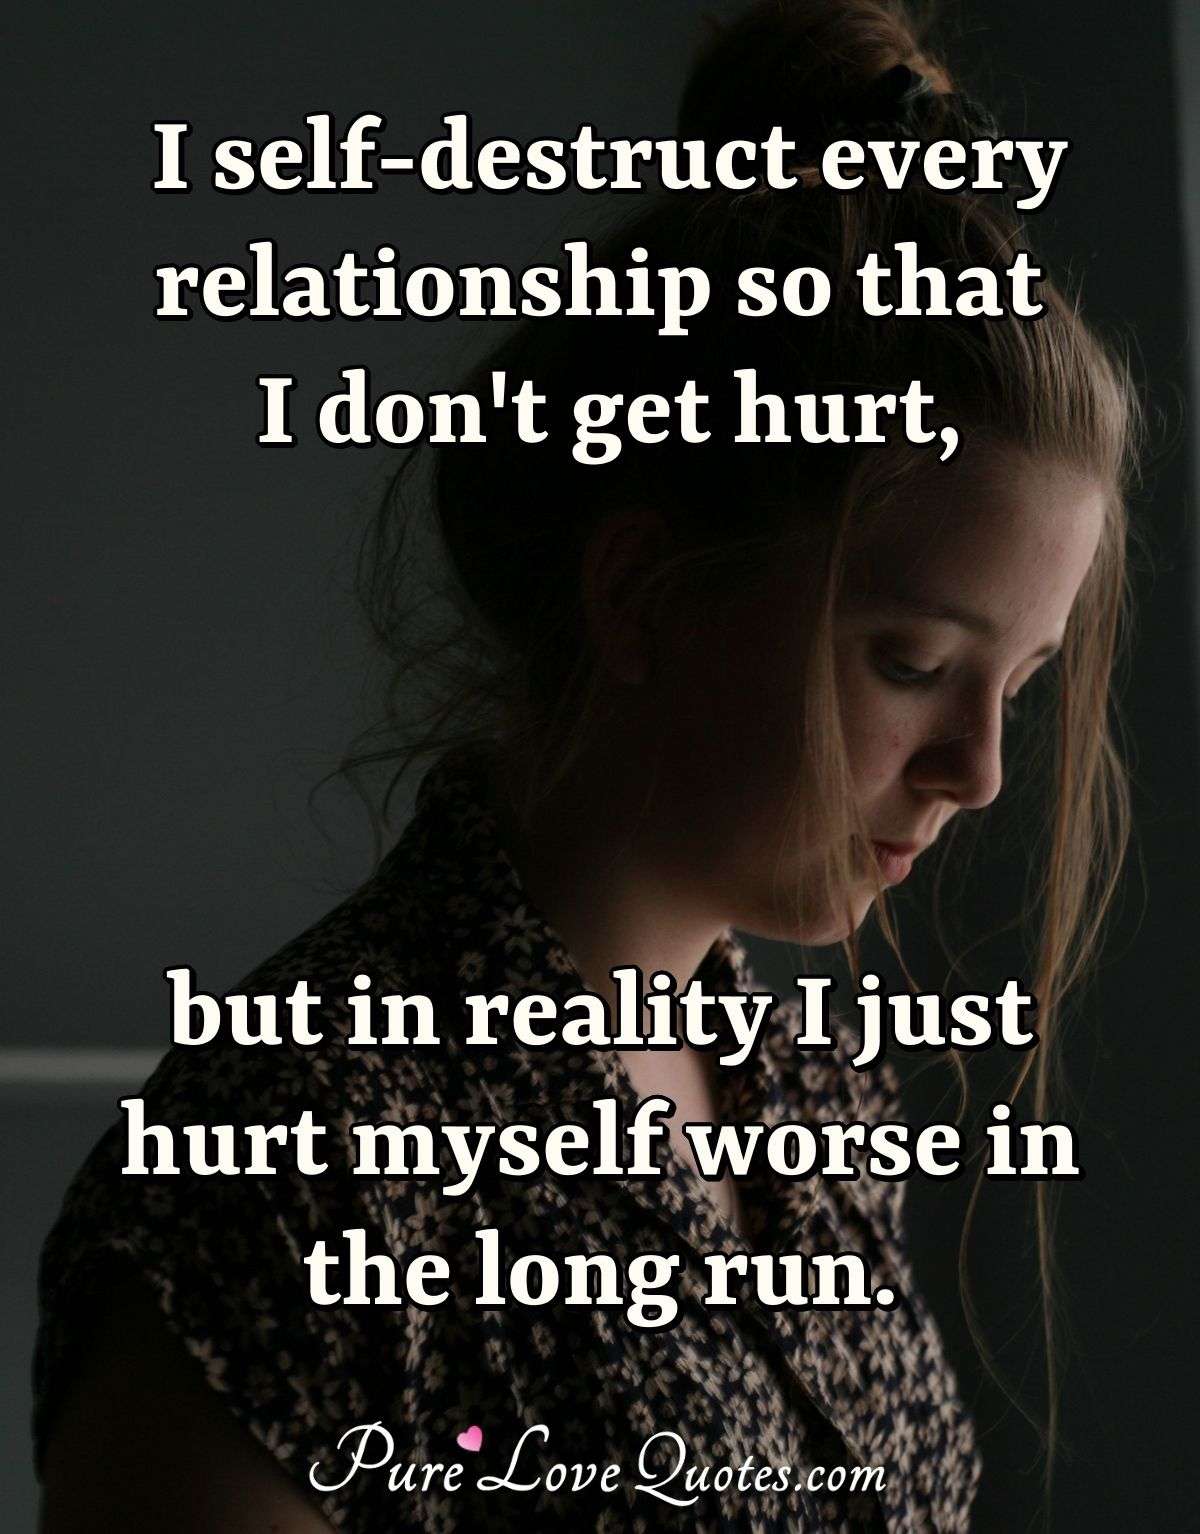 I self-destruct every relationship so that I don't get hurt, but in reality I just hurt myself worse in the long run. - Anonymous